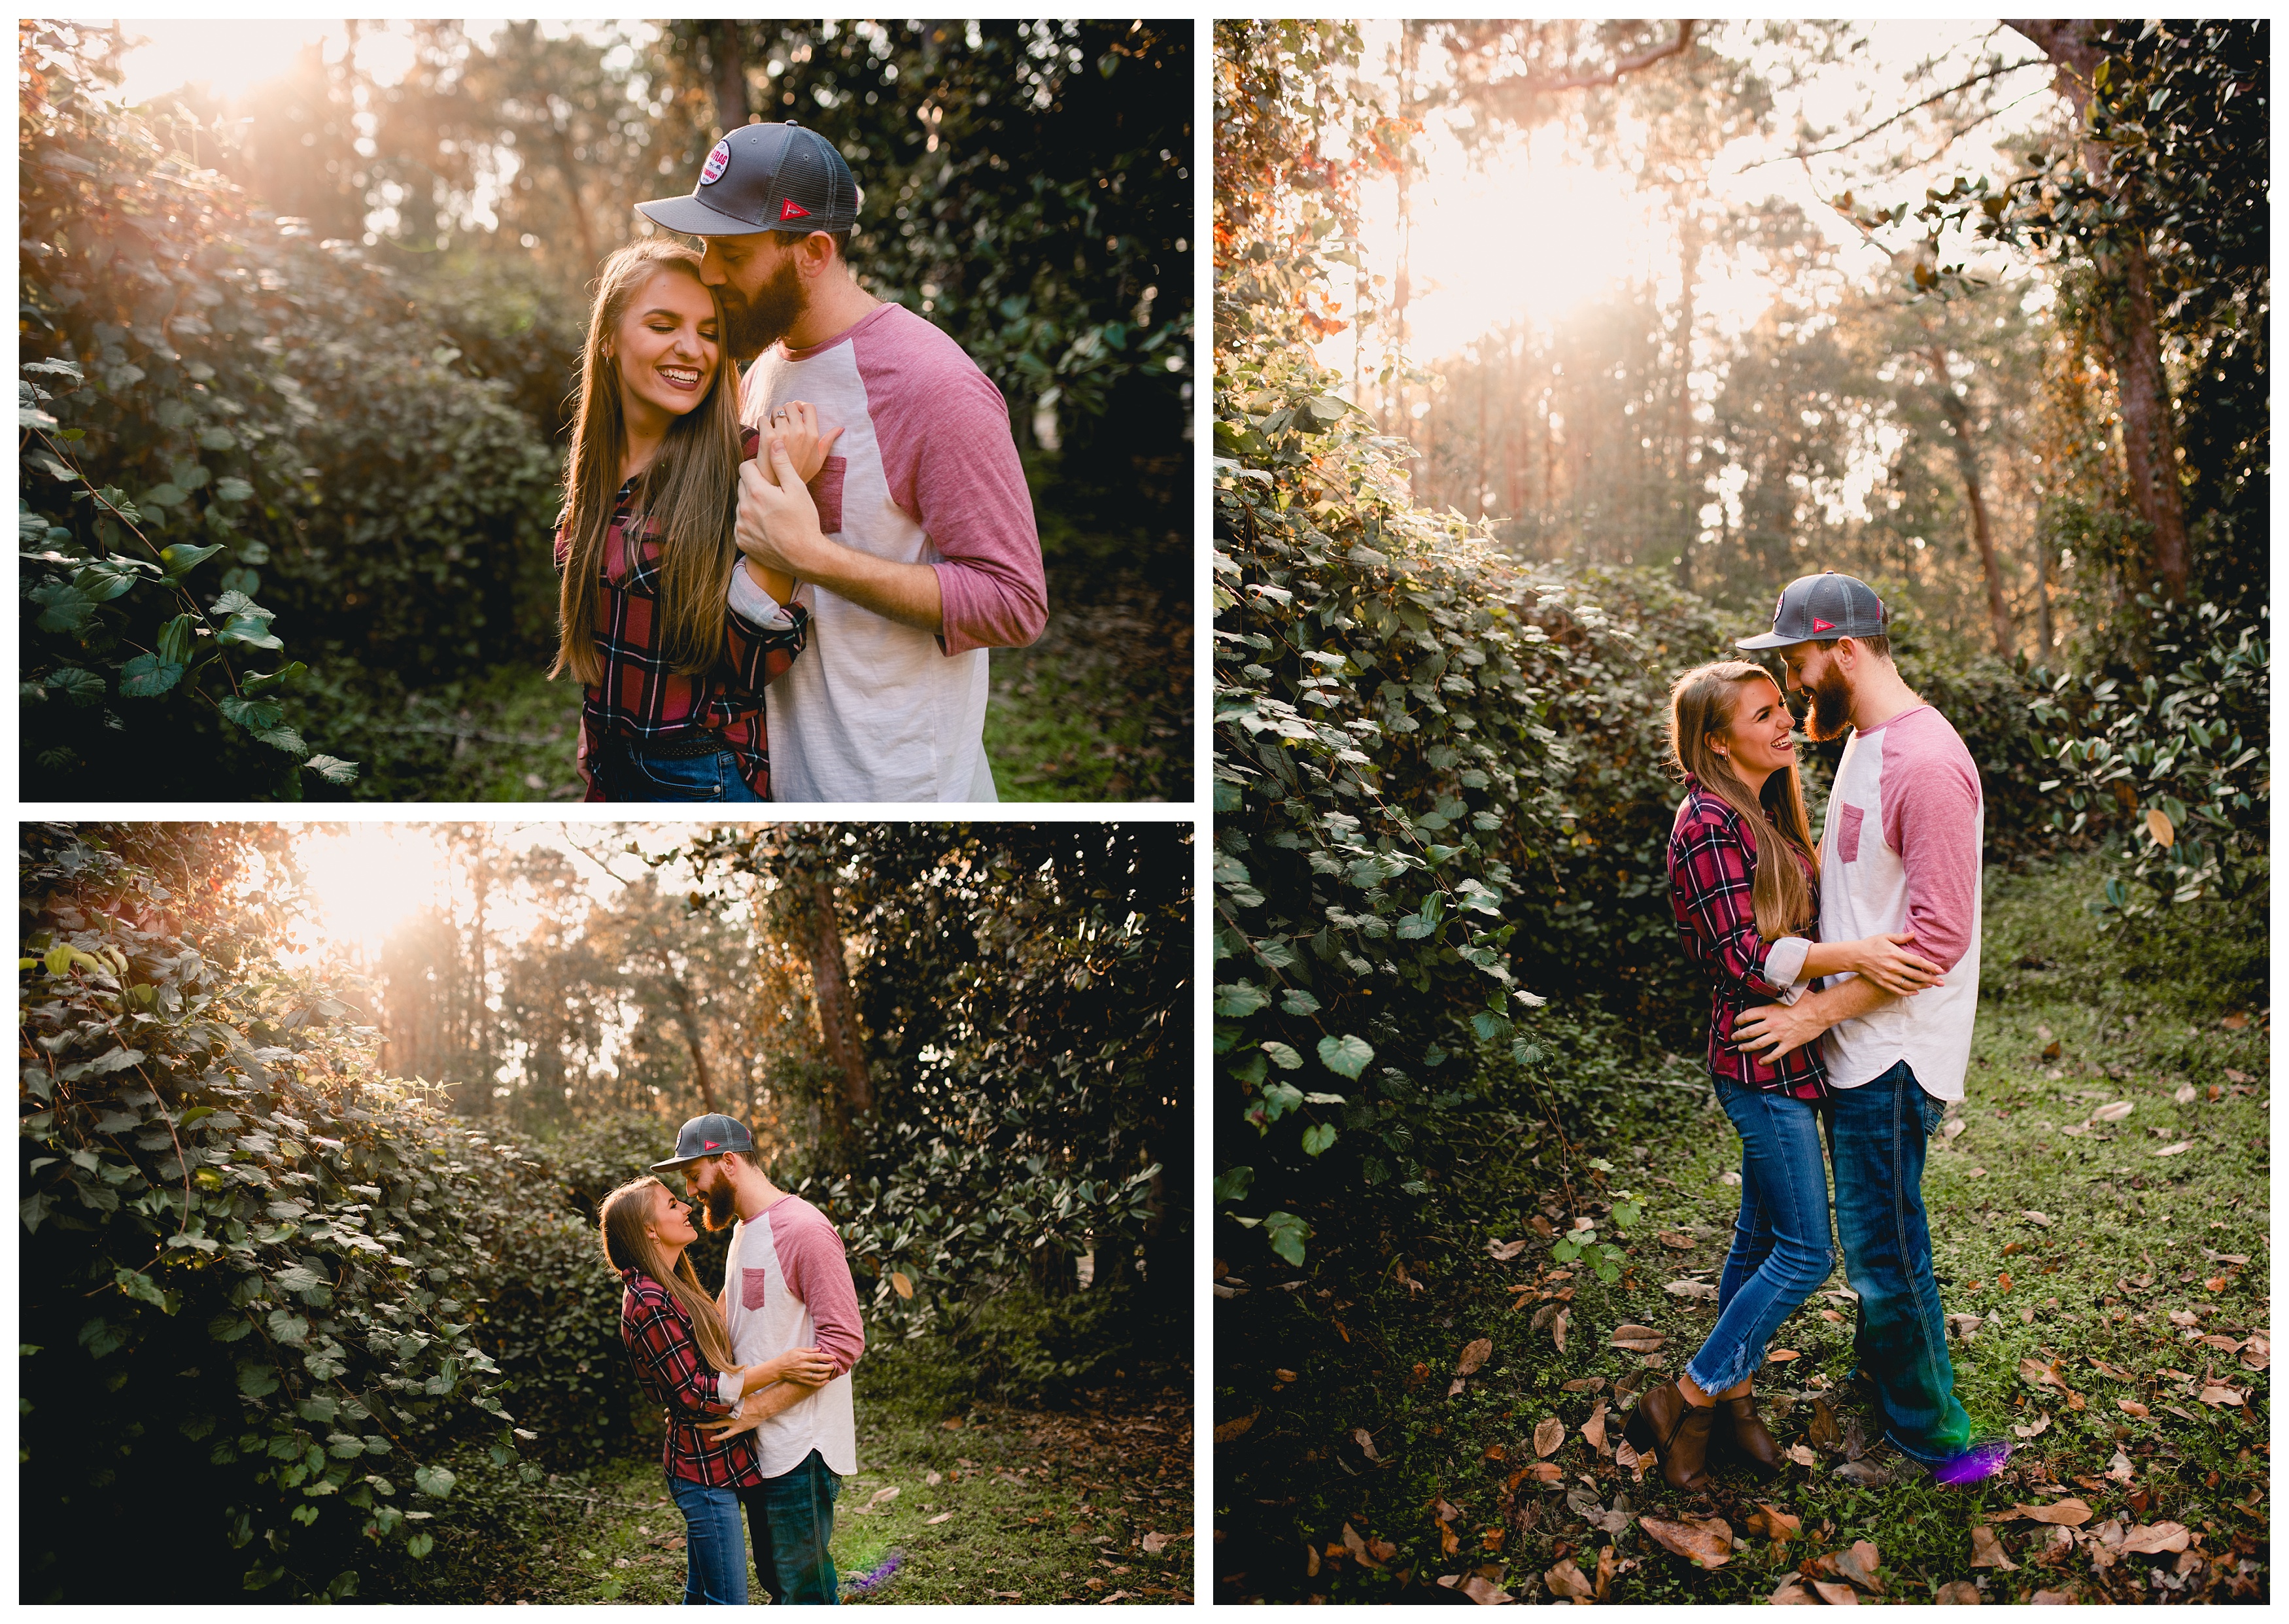 Couple gets engaged in Tallahassee, FL. Photos taken by Shelly Williams Photography